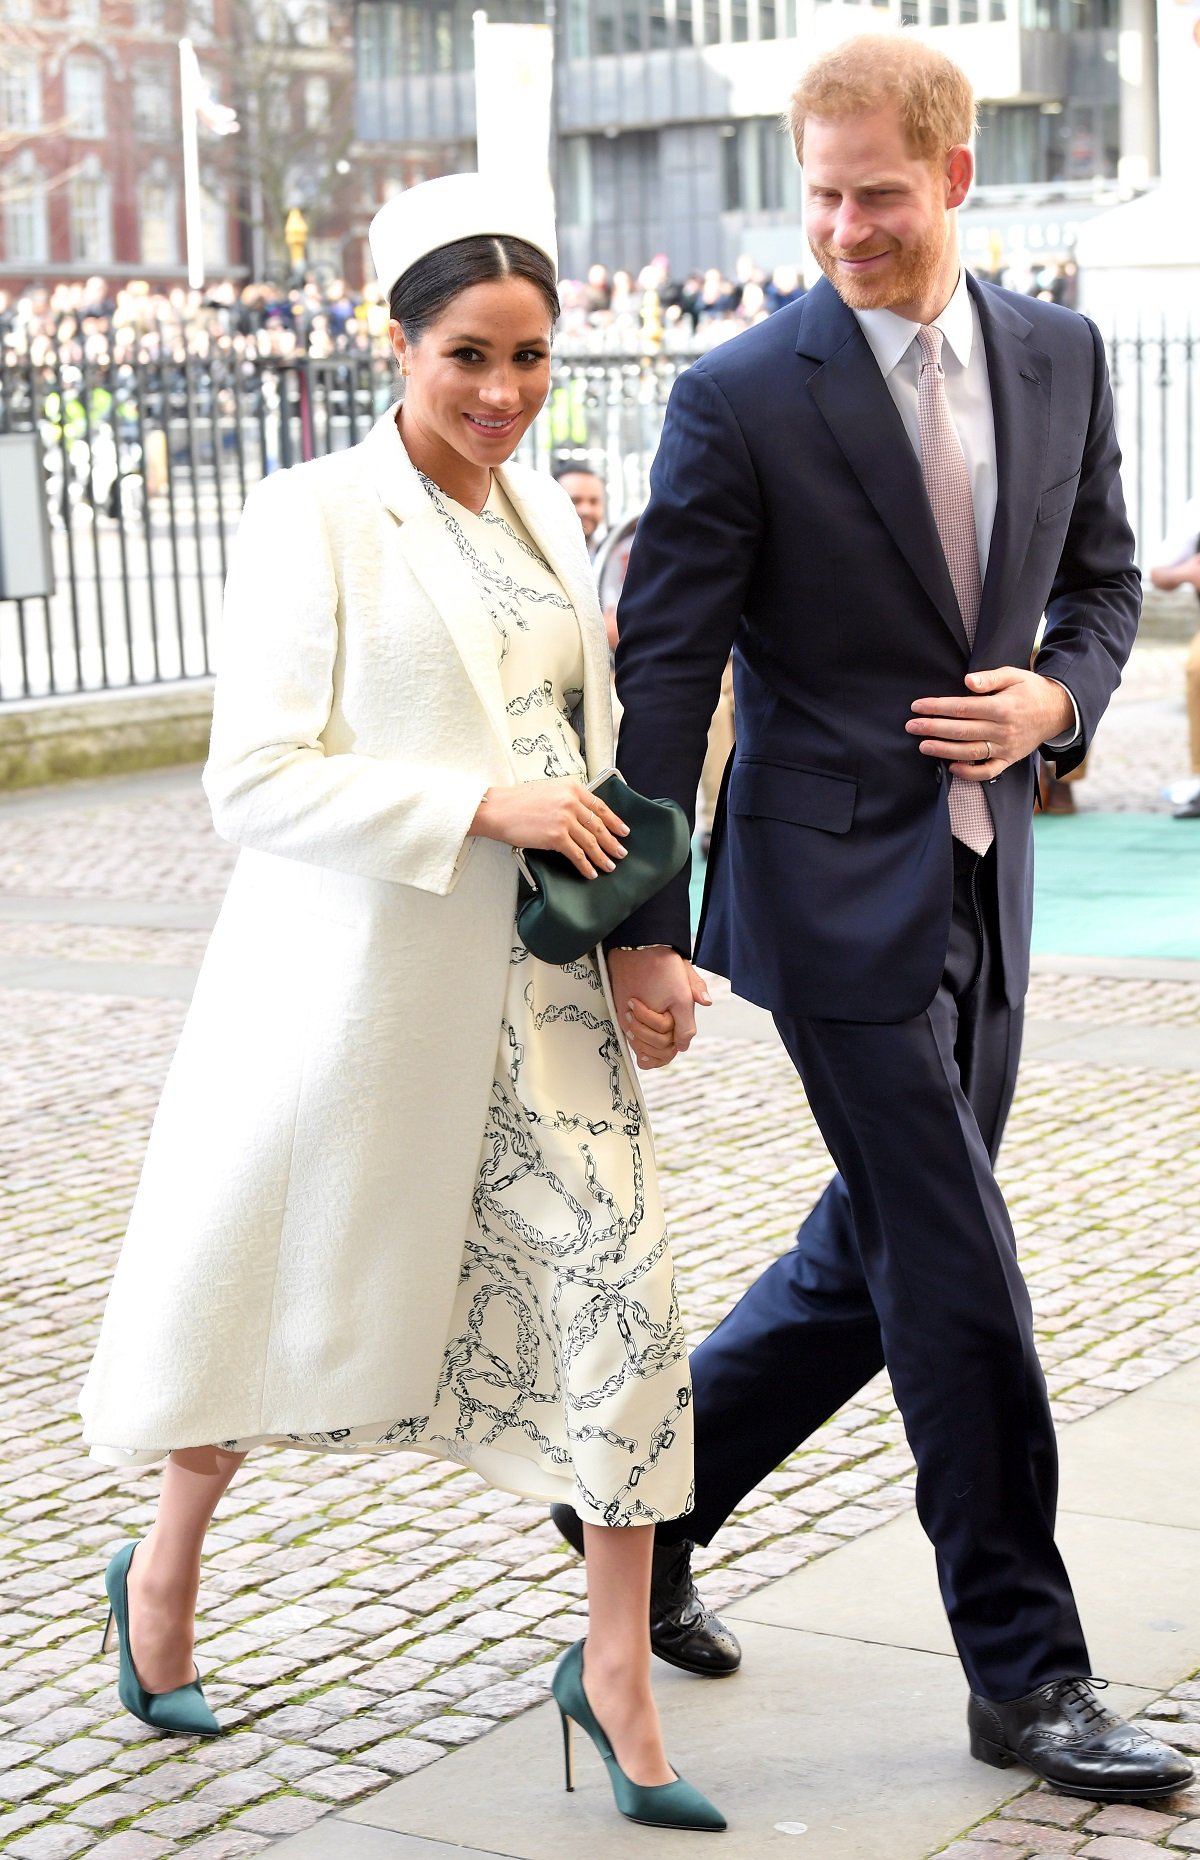 Meghan, Duchess of Sussex and Prince Harry, Duke of Sussex walking into the Commonwealth Day service at Westminster Abbey on March 11, 2019 in London, England.